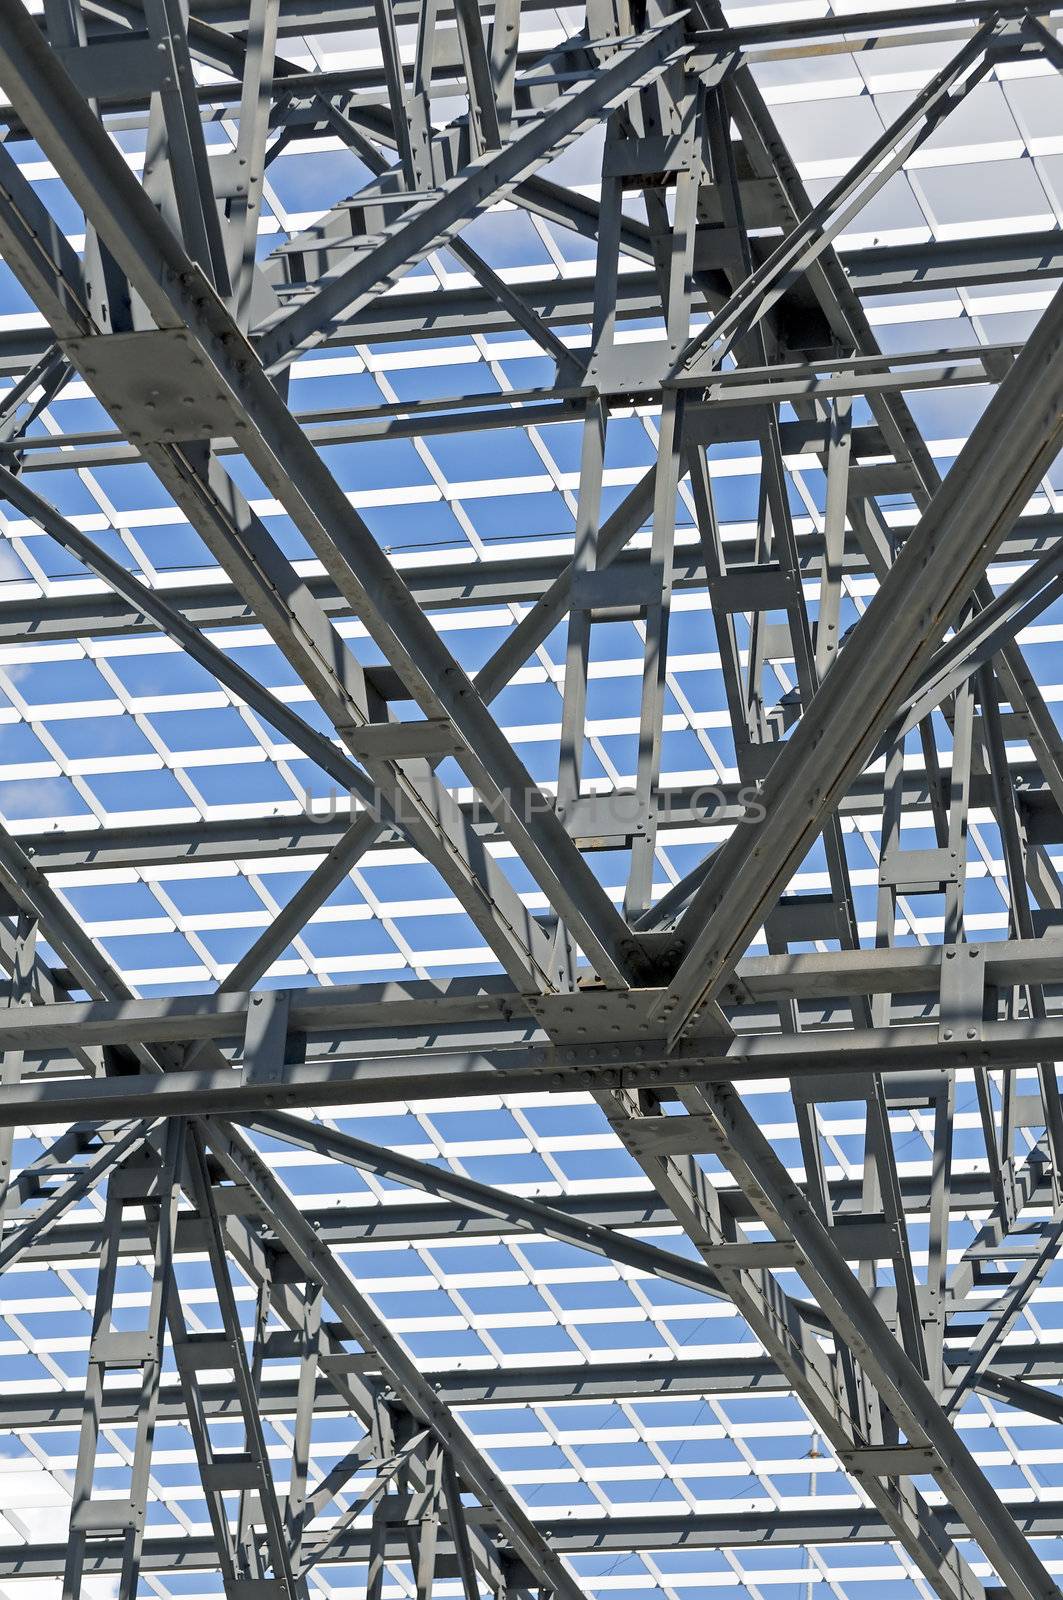 Detail of steel framework of a roof against a blue sky